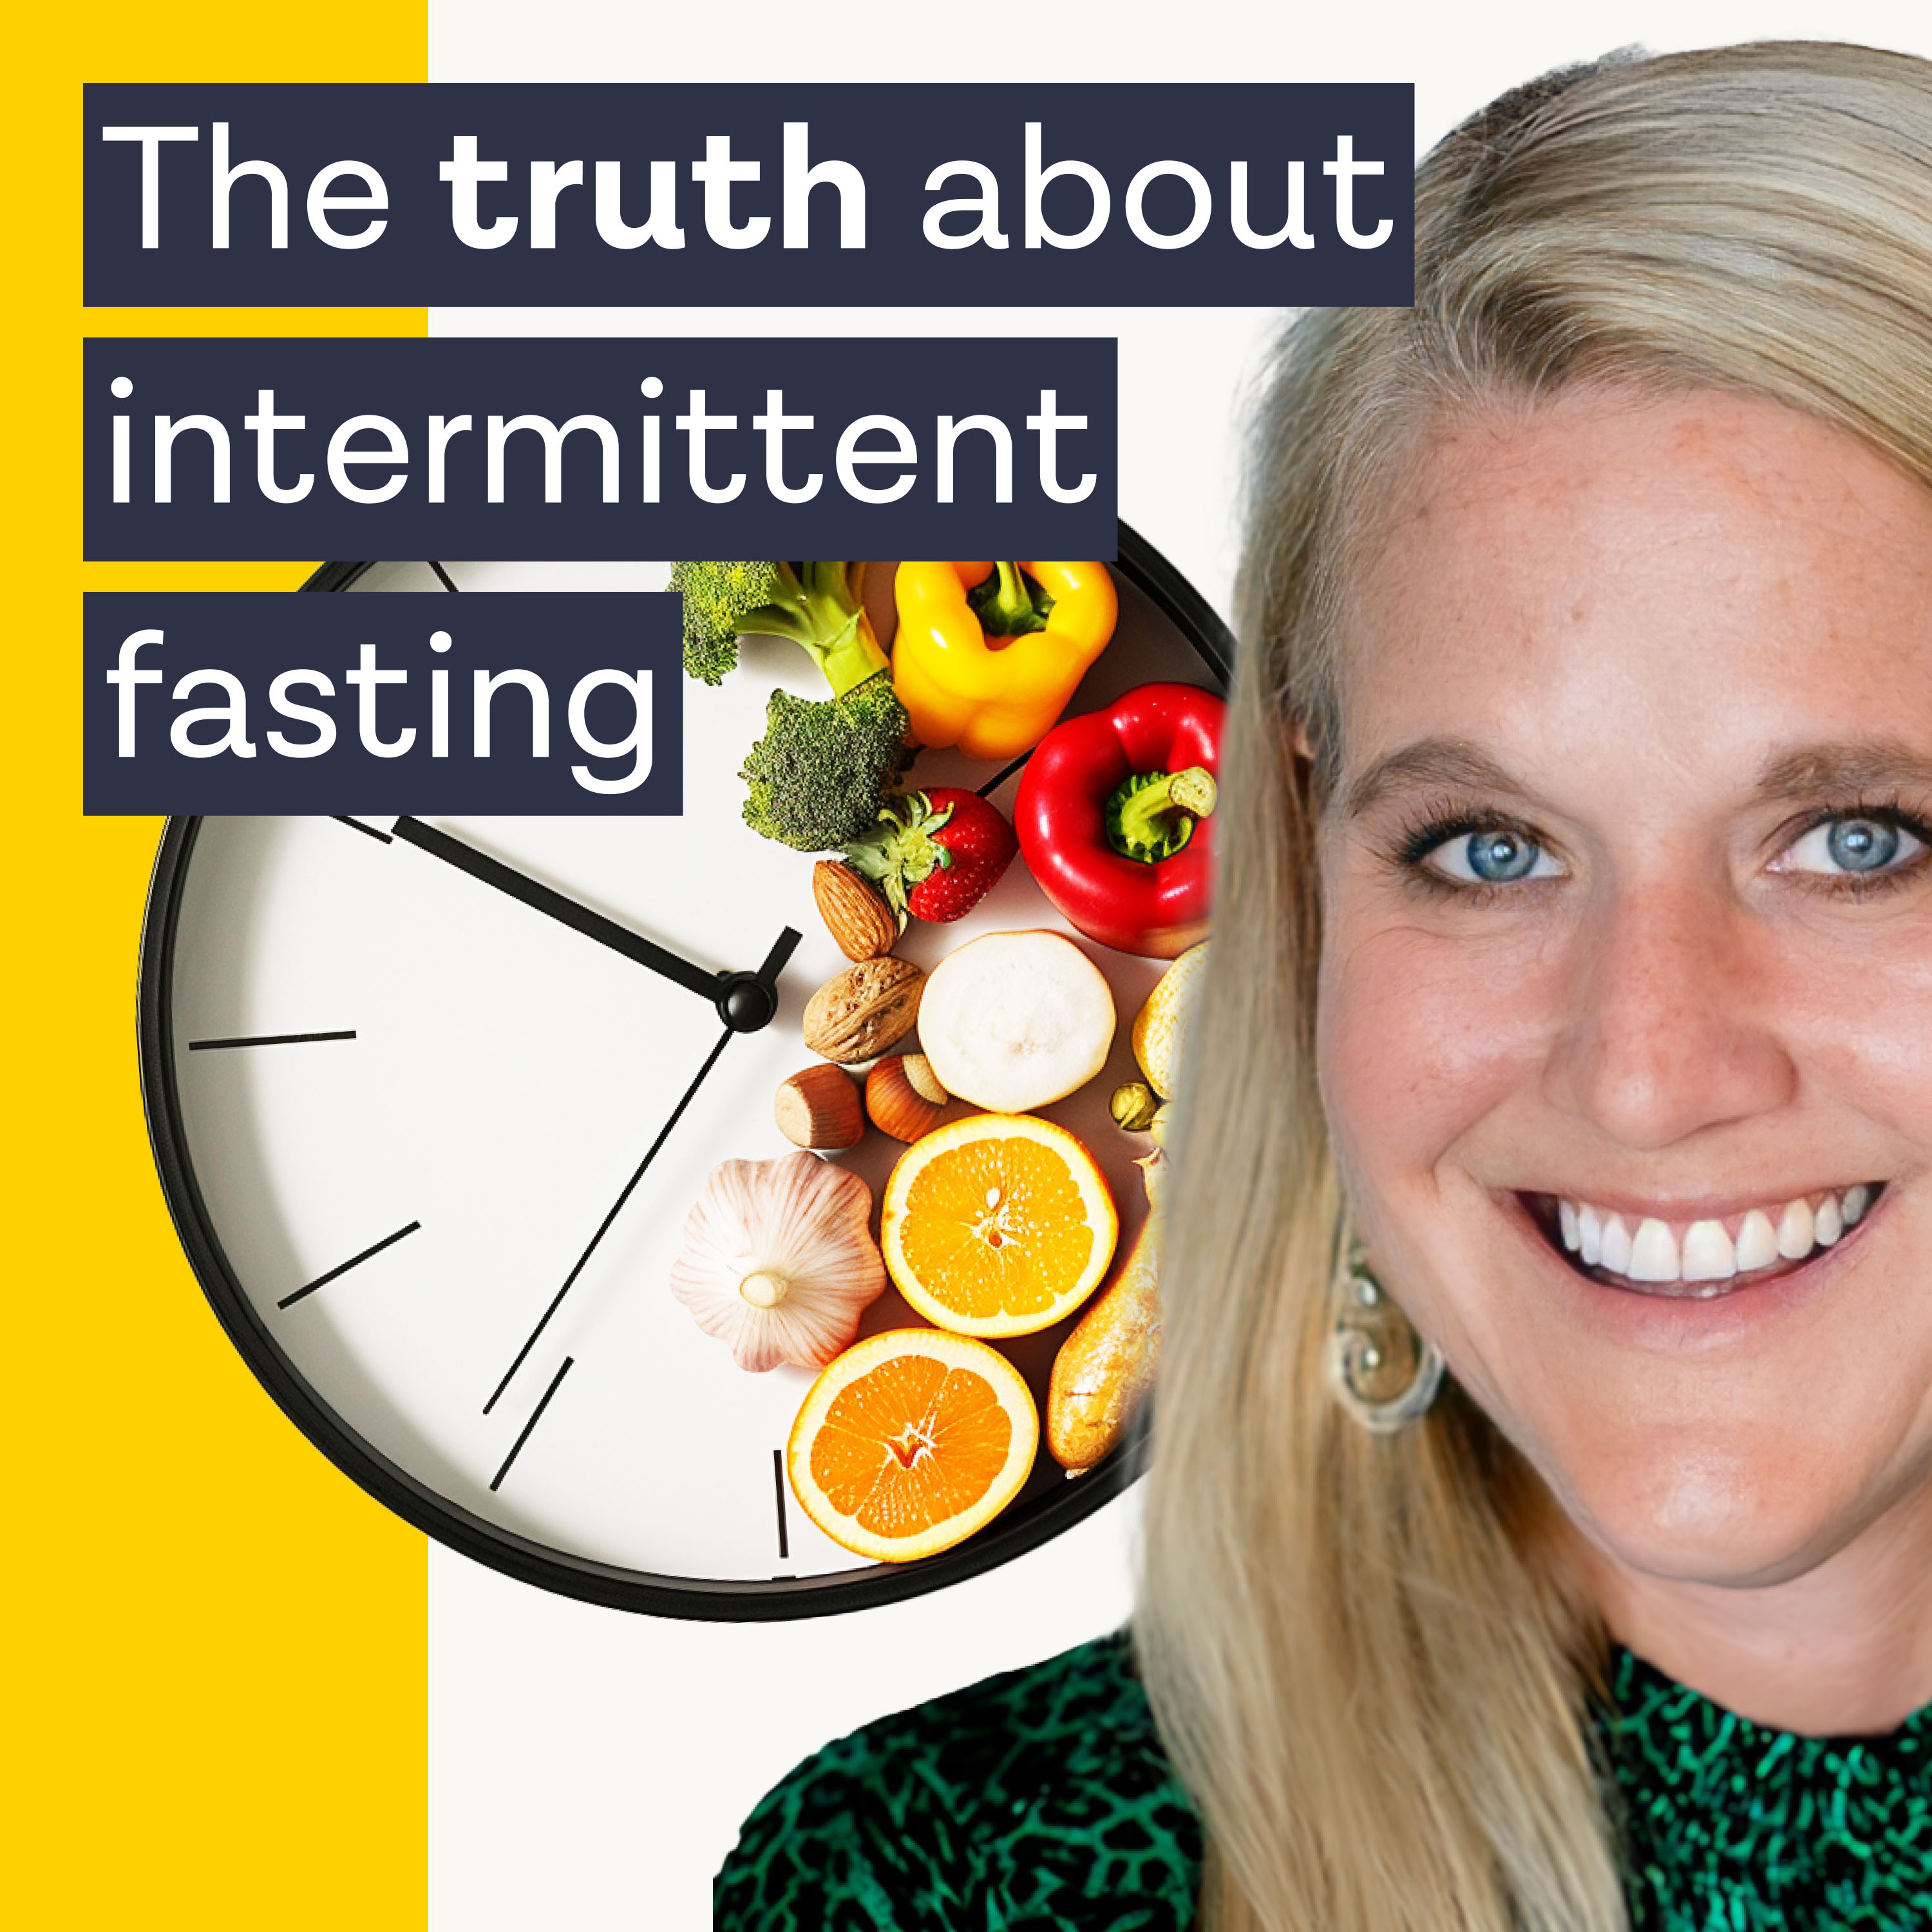 The world's biggest intermittent fasting study - what we learned with Prof. Tim Spector & Gin Stephens